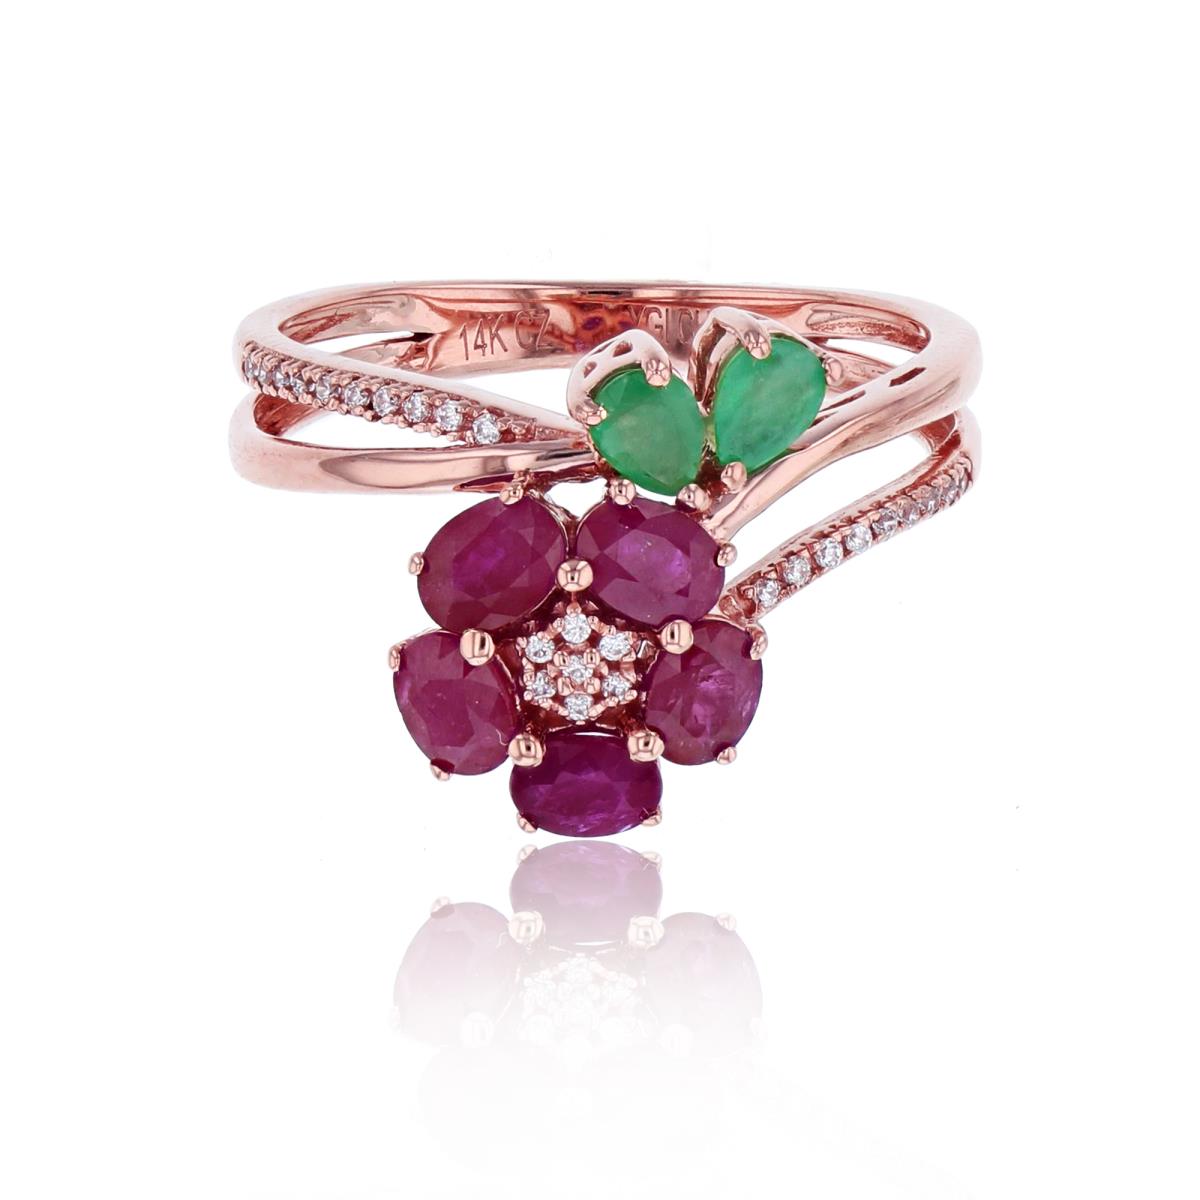 Sterling Silver Rose 0.05 CTTW Rnd Diamonds & Ov Ruby/ PS Emerald Flower Ring